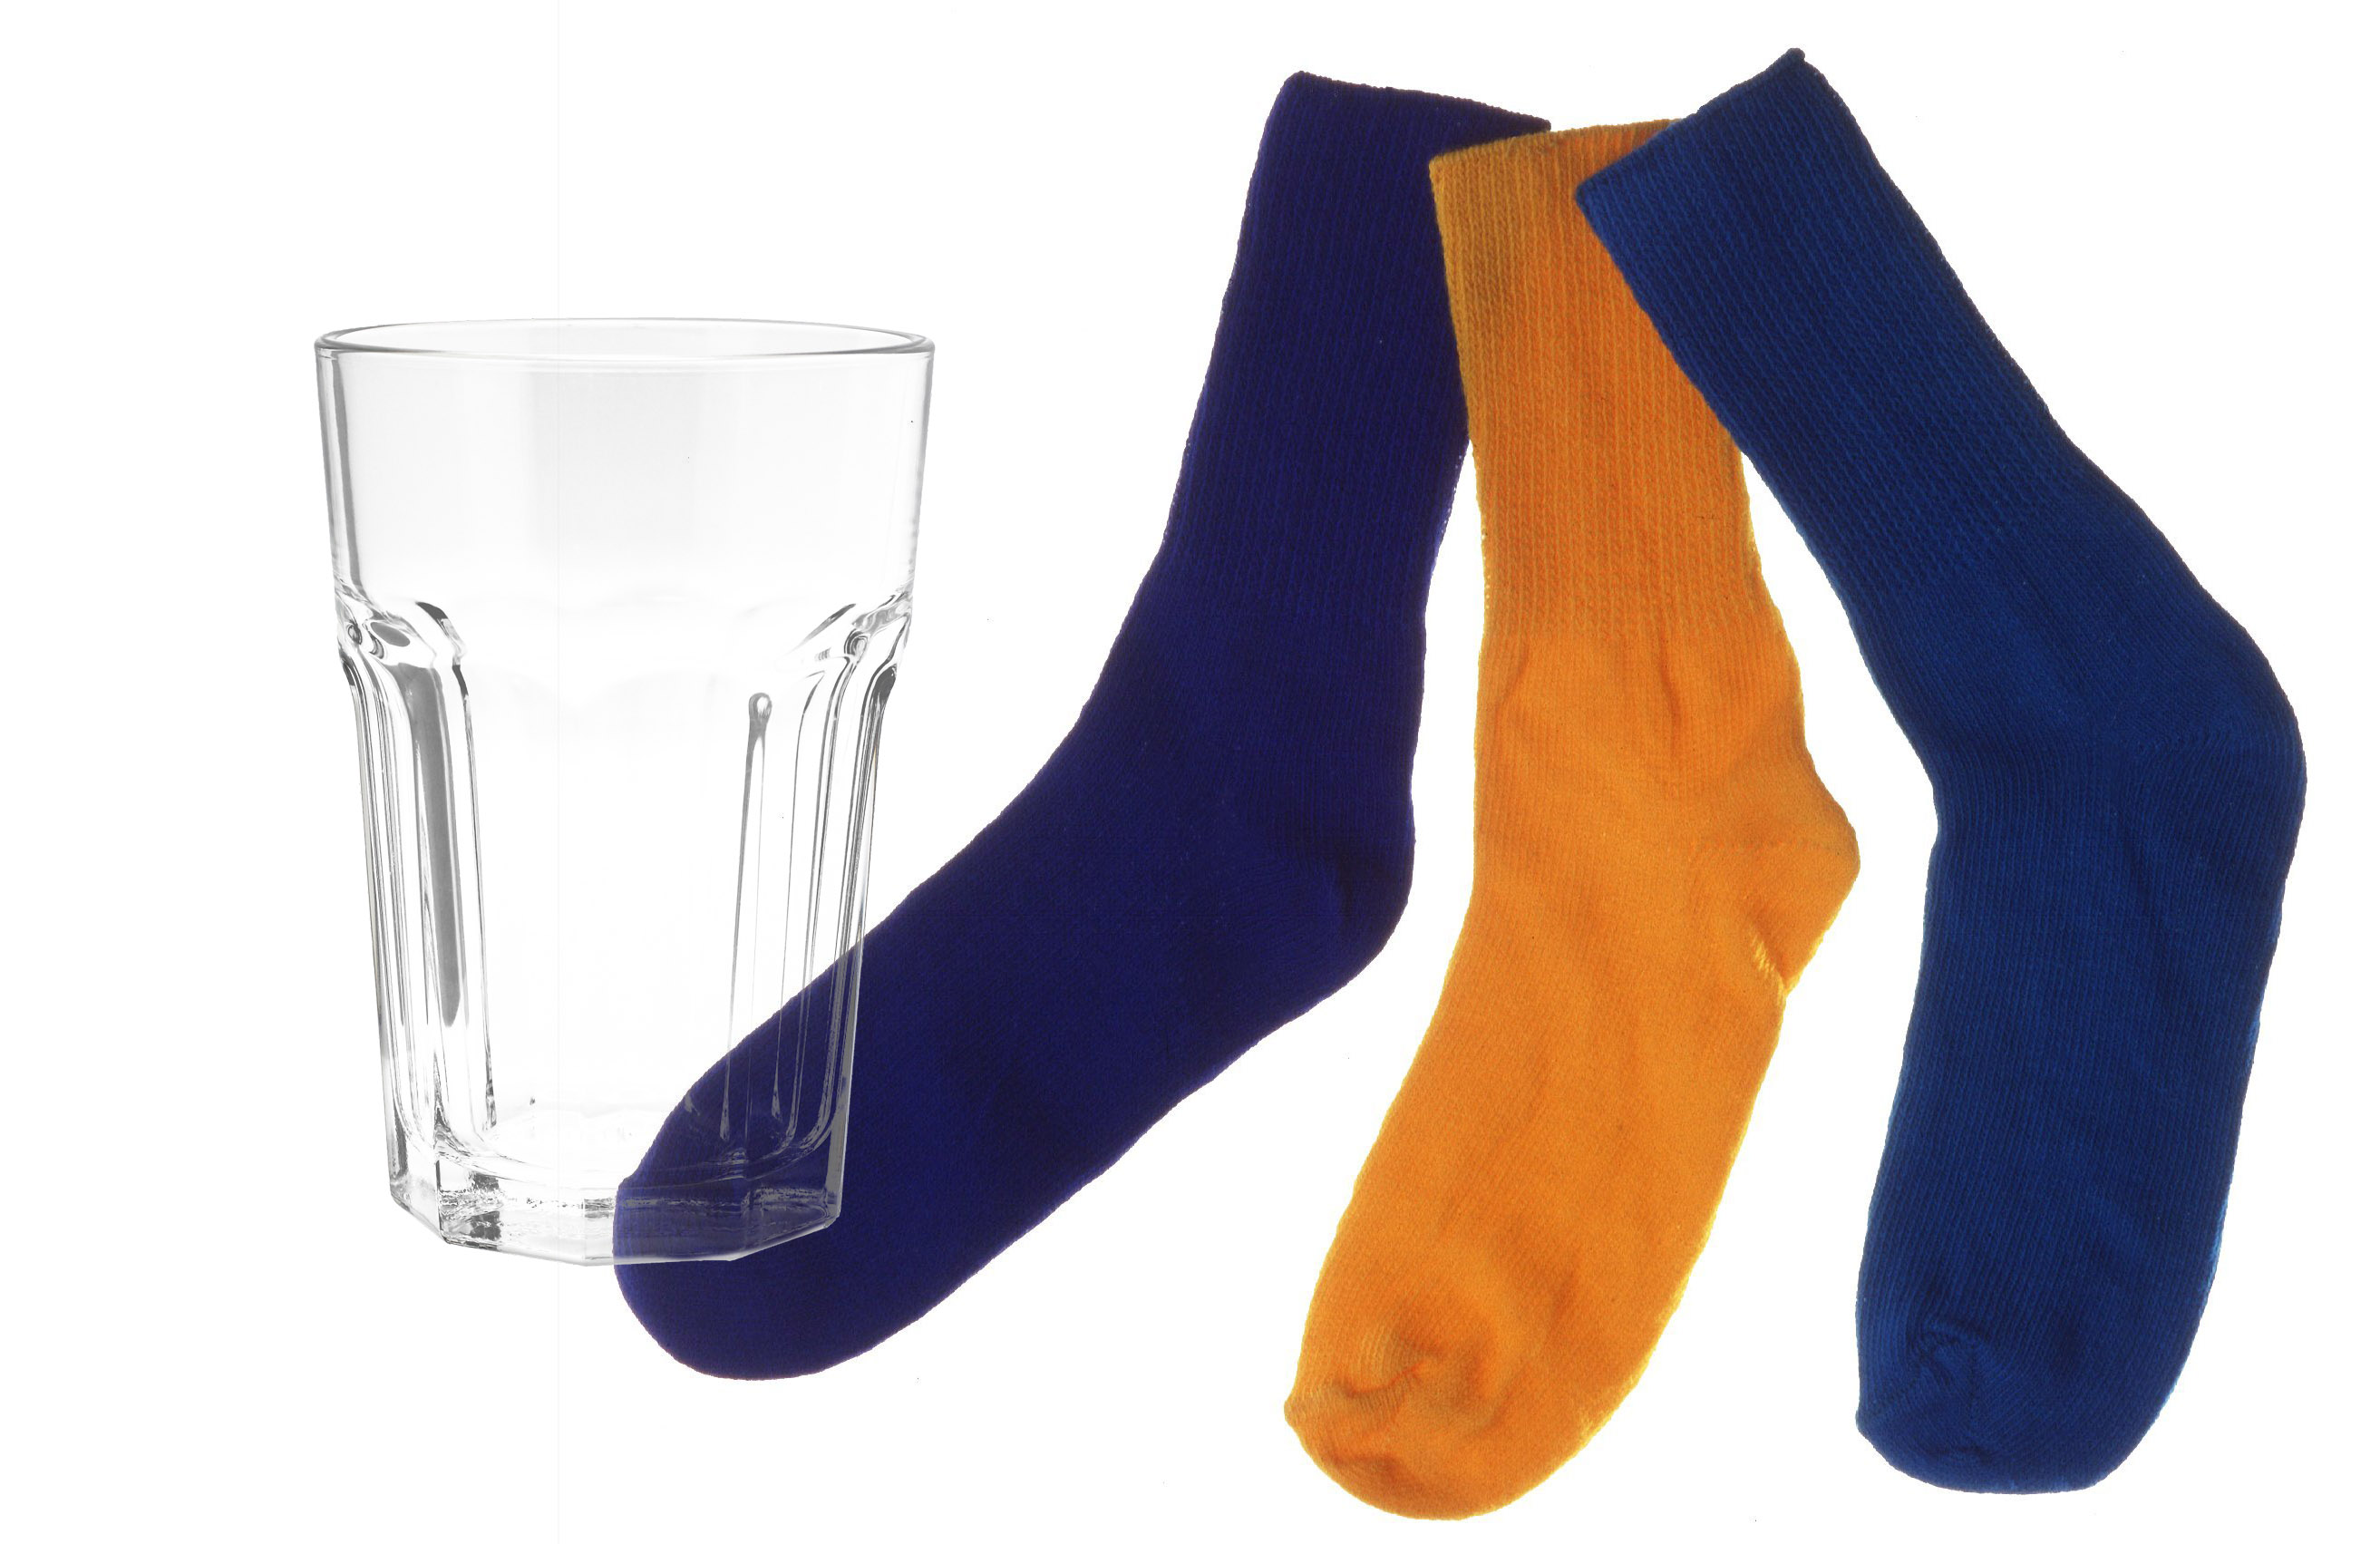 A clear water glass juxtaposed with some socks.